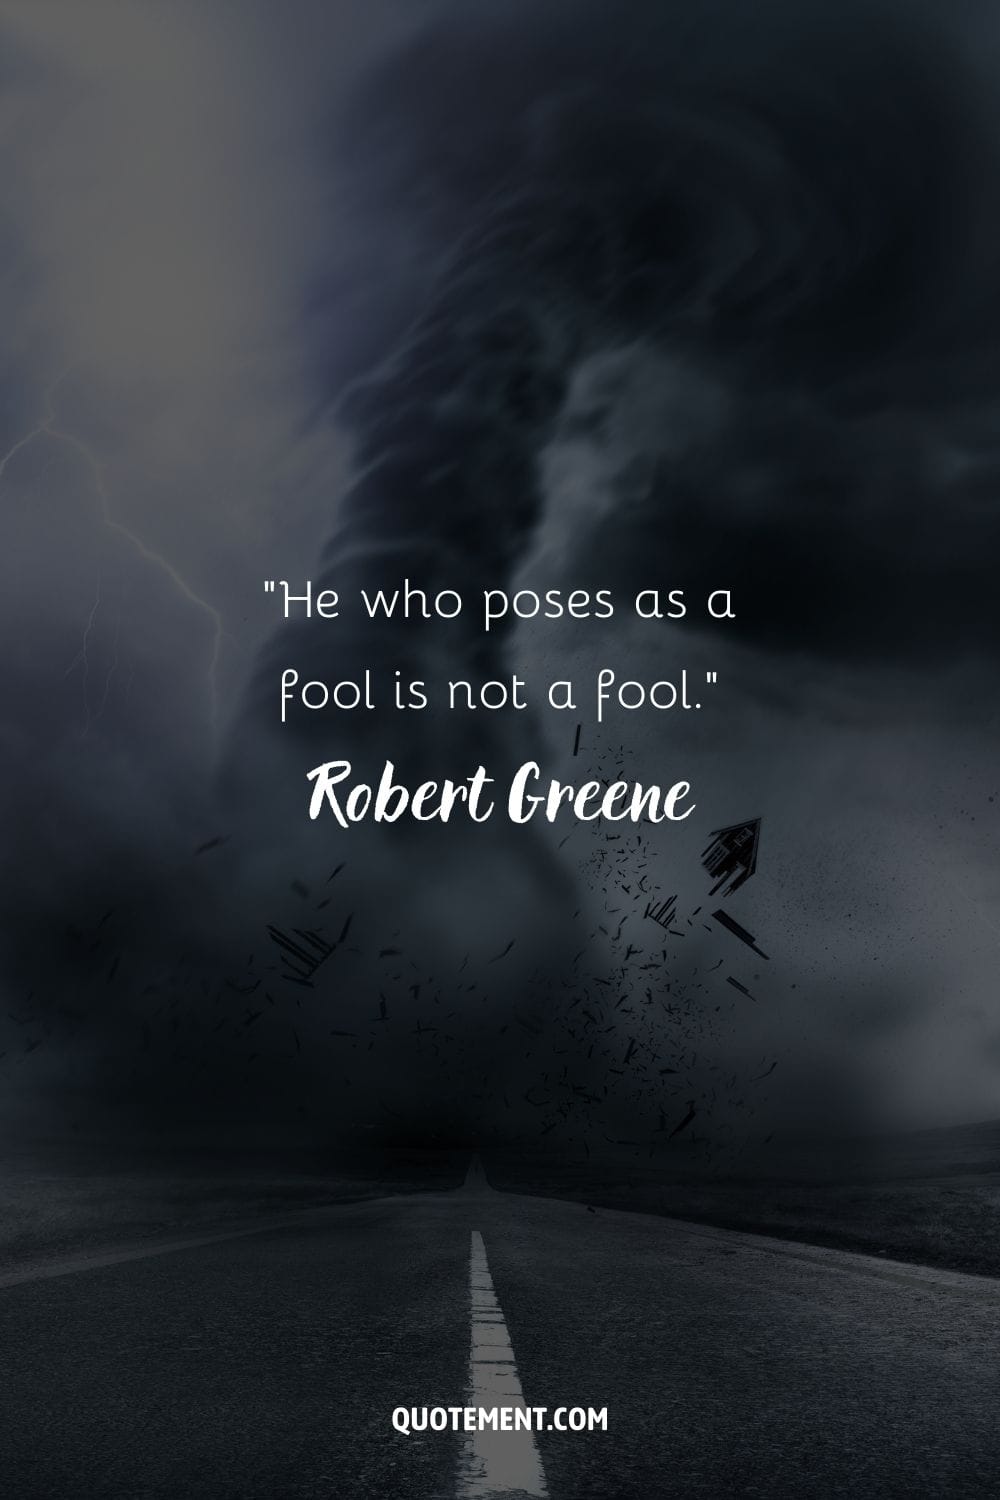 “He who poses as a fool is not a fool.” ― Robert Greene, The 48 Laws of Power